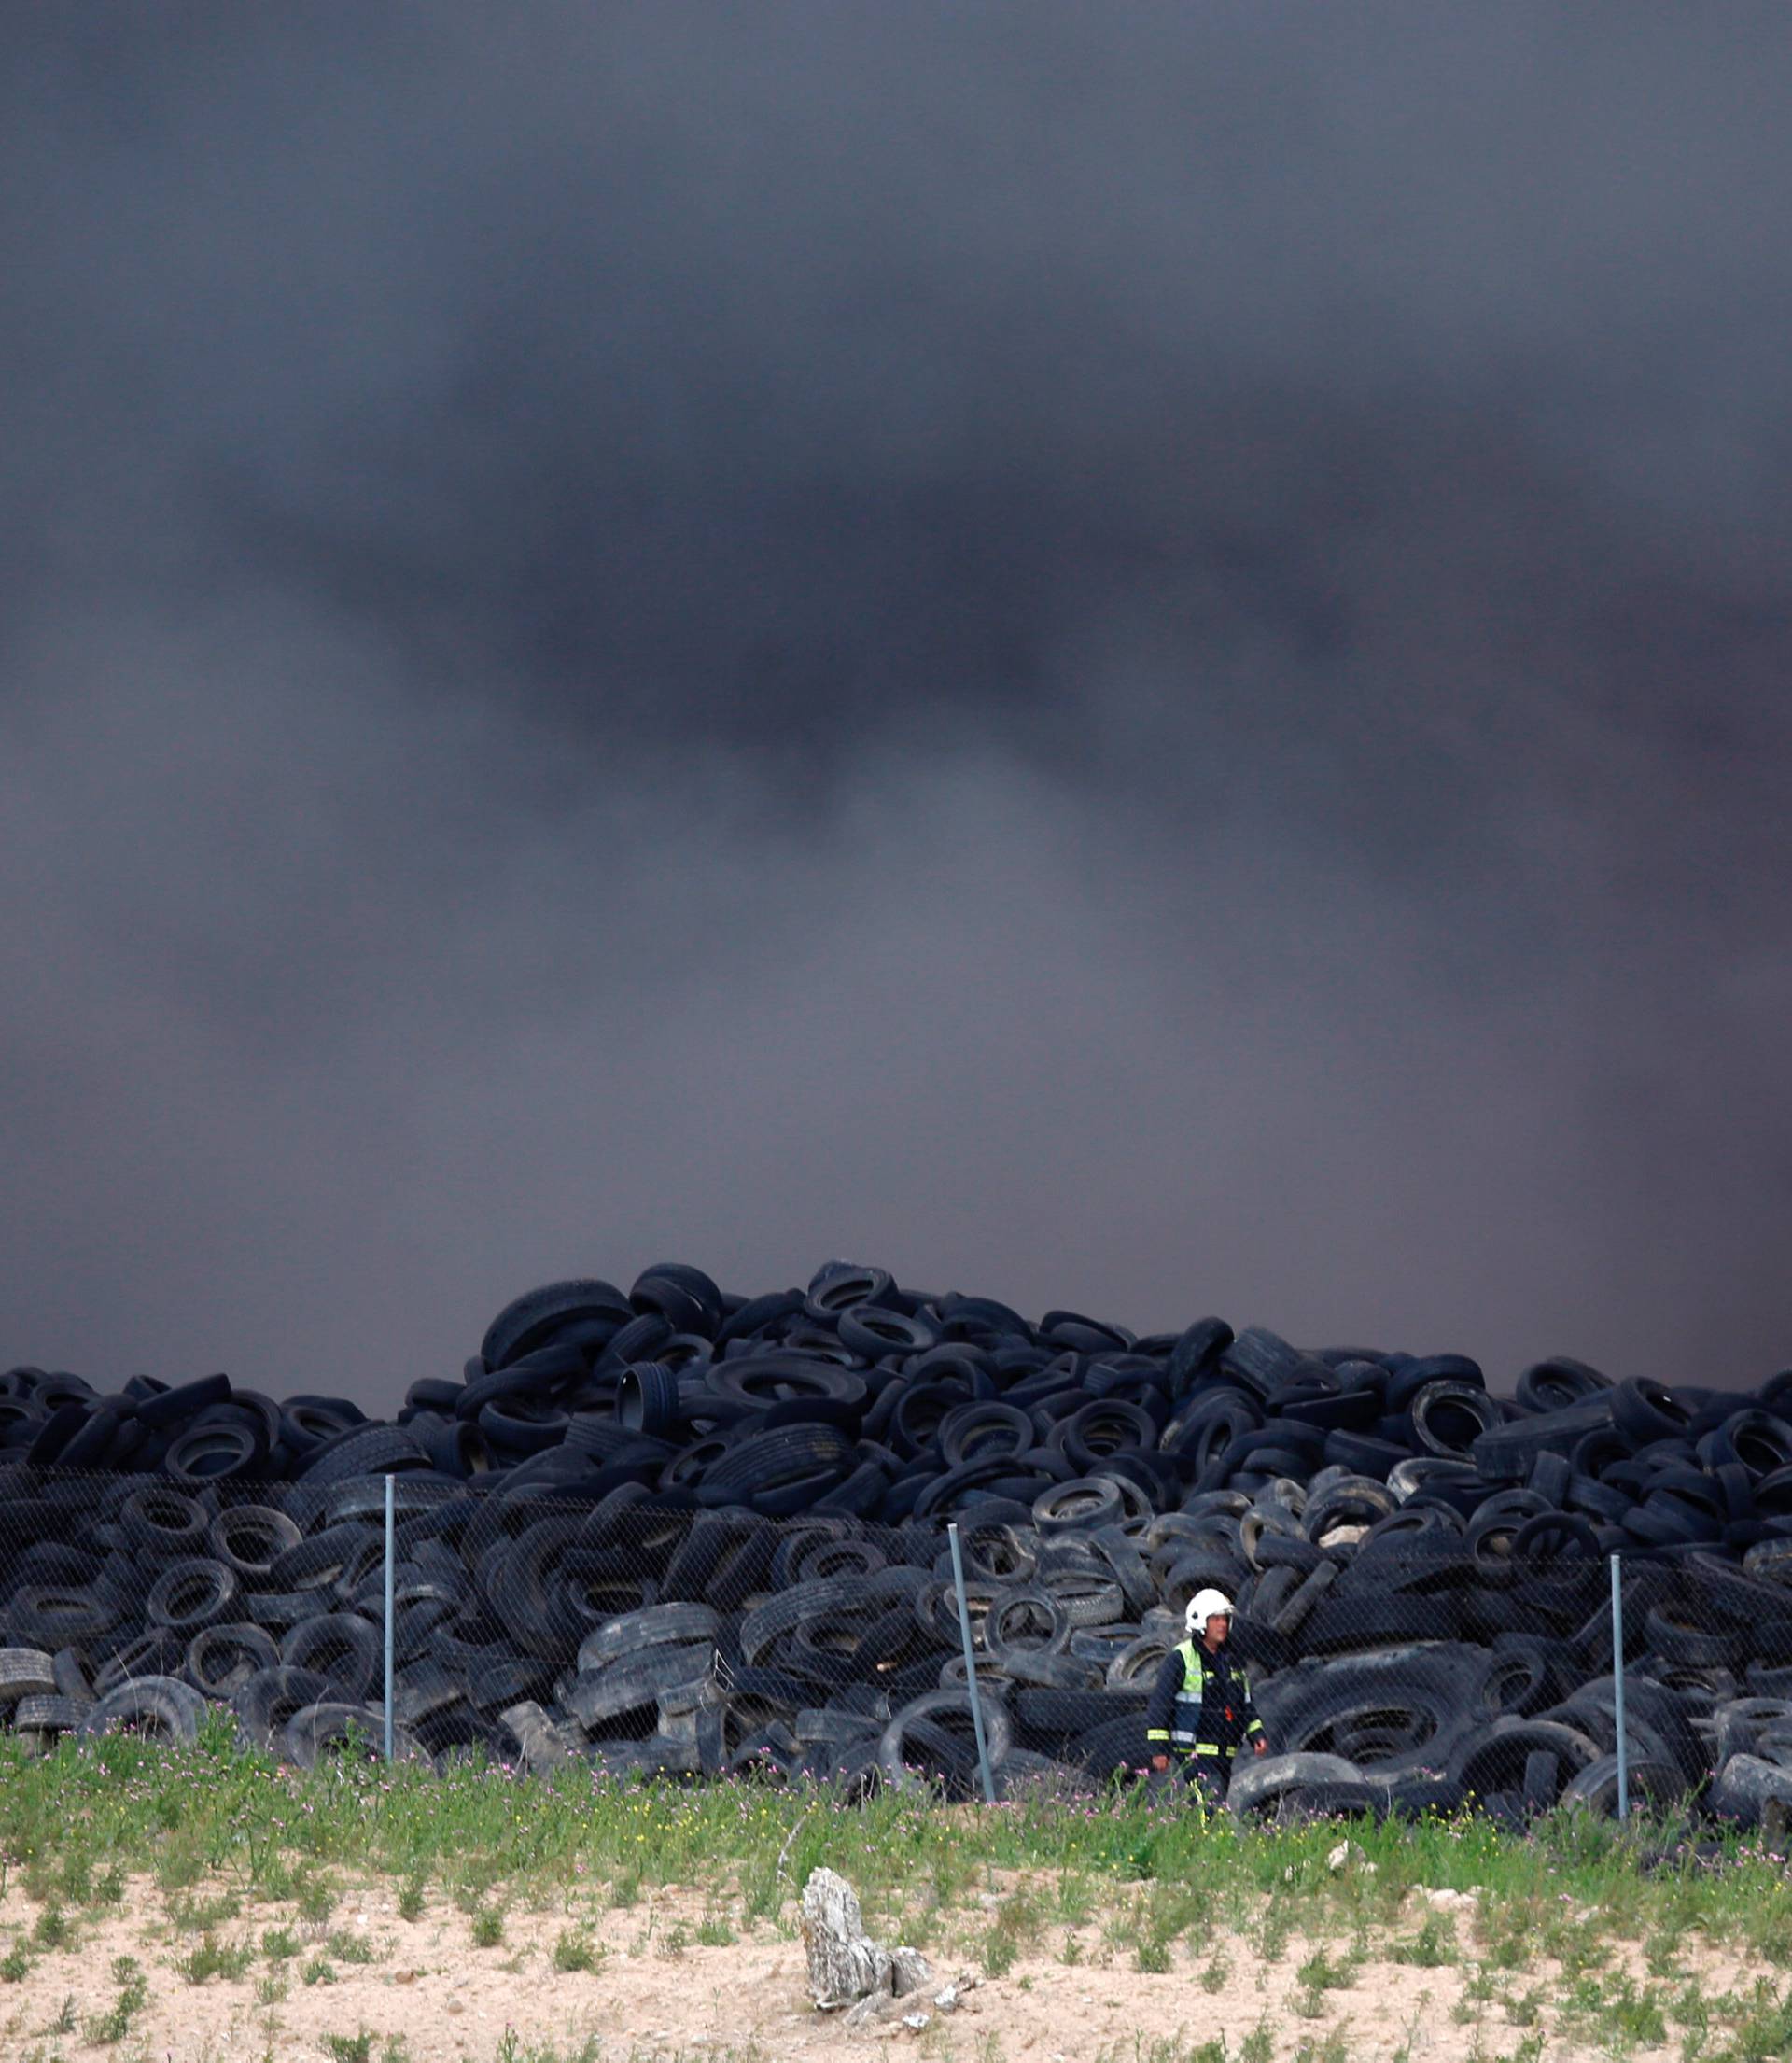 A firefigther walks amidst smoke during a fire at a tire dump near a residential development in Sesena